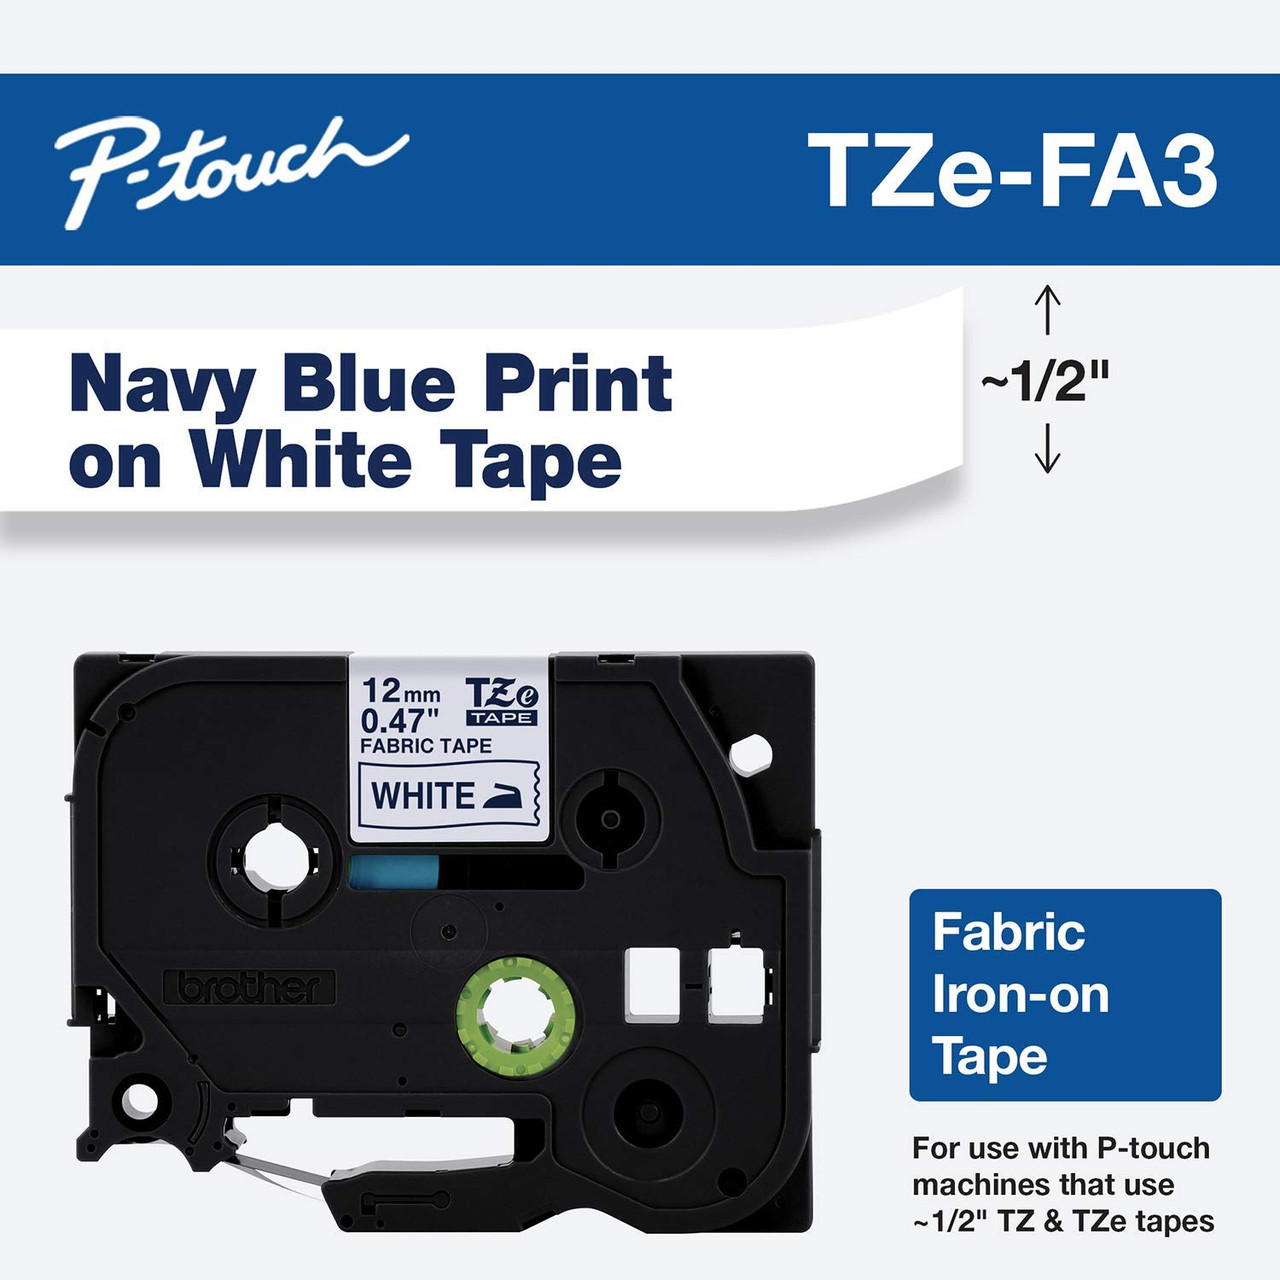 Conform Over instelling Basistheorie Brother TZe-FA3 1/2 Fabric Iron-On P-touch Tape - 12mm TZFA3